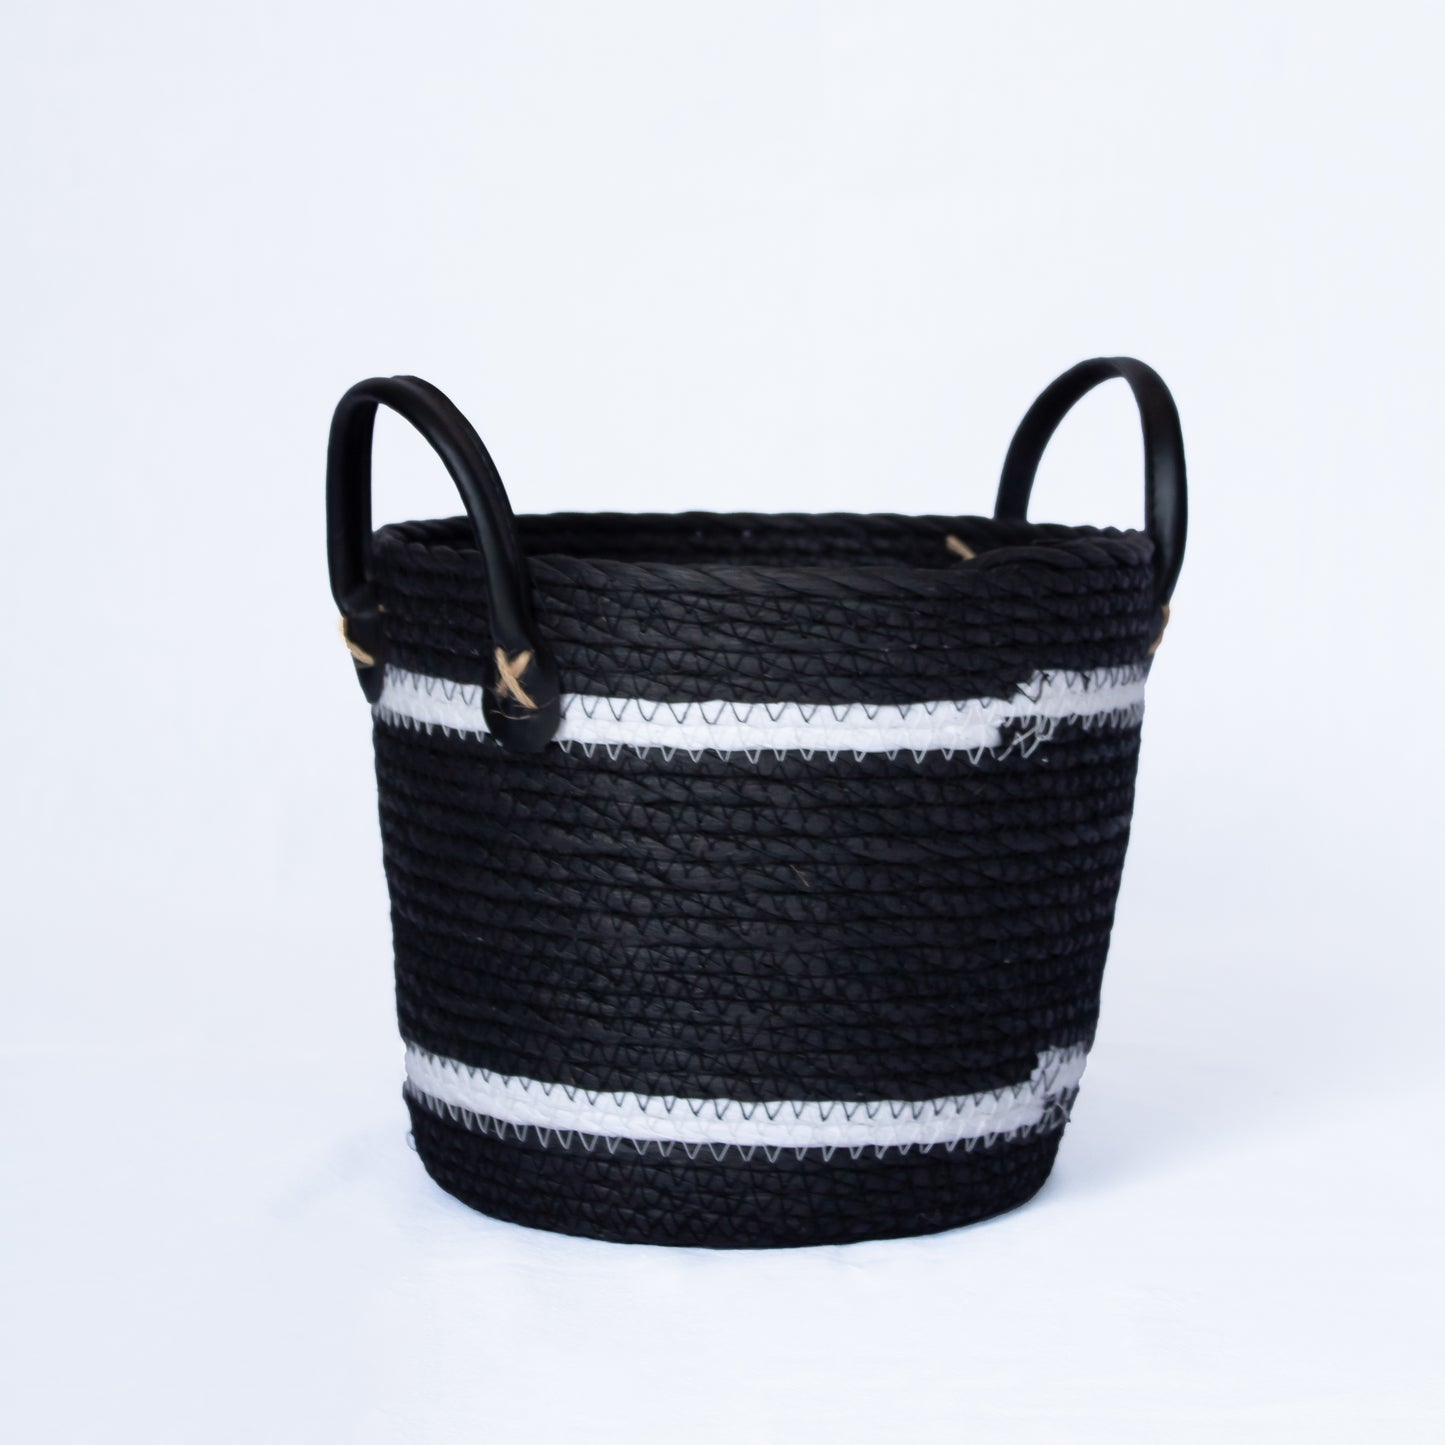 Two-Striped Black Basket with Leather Handles